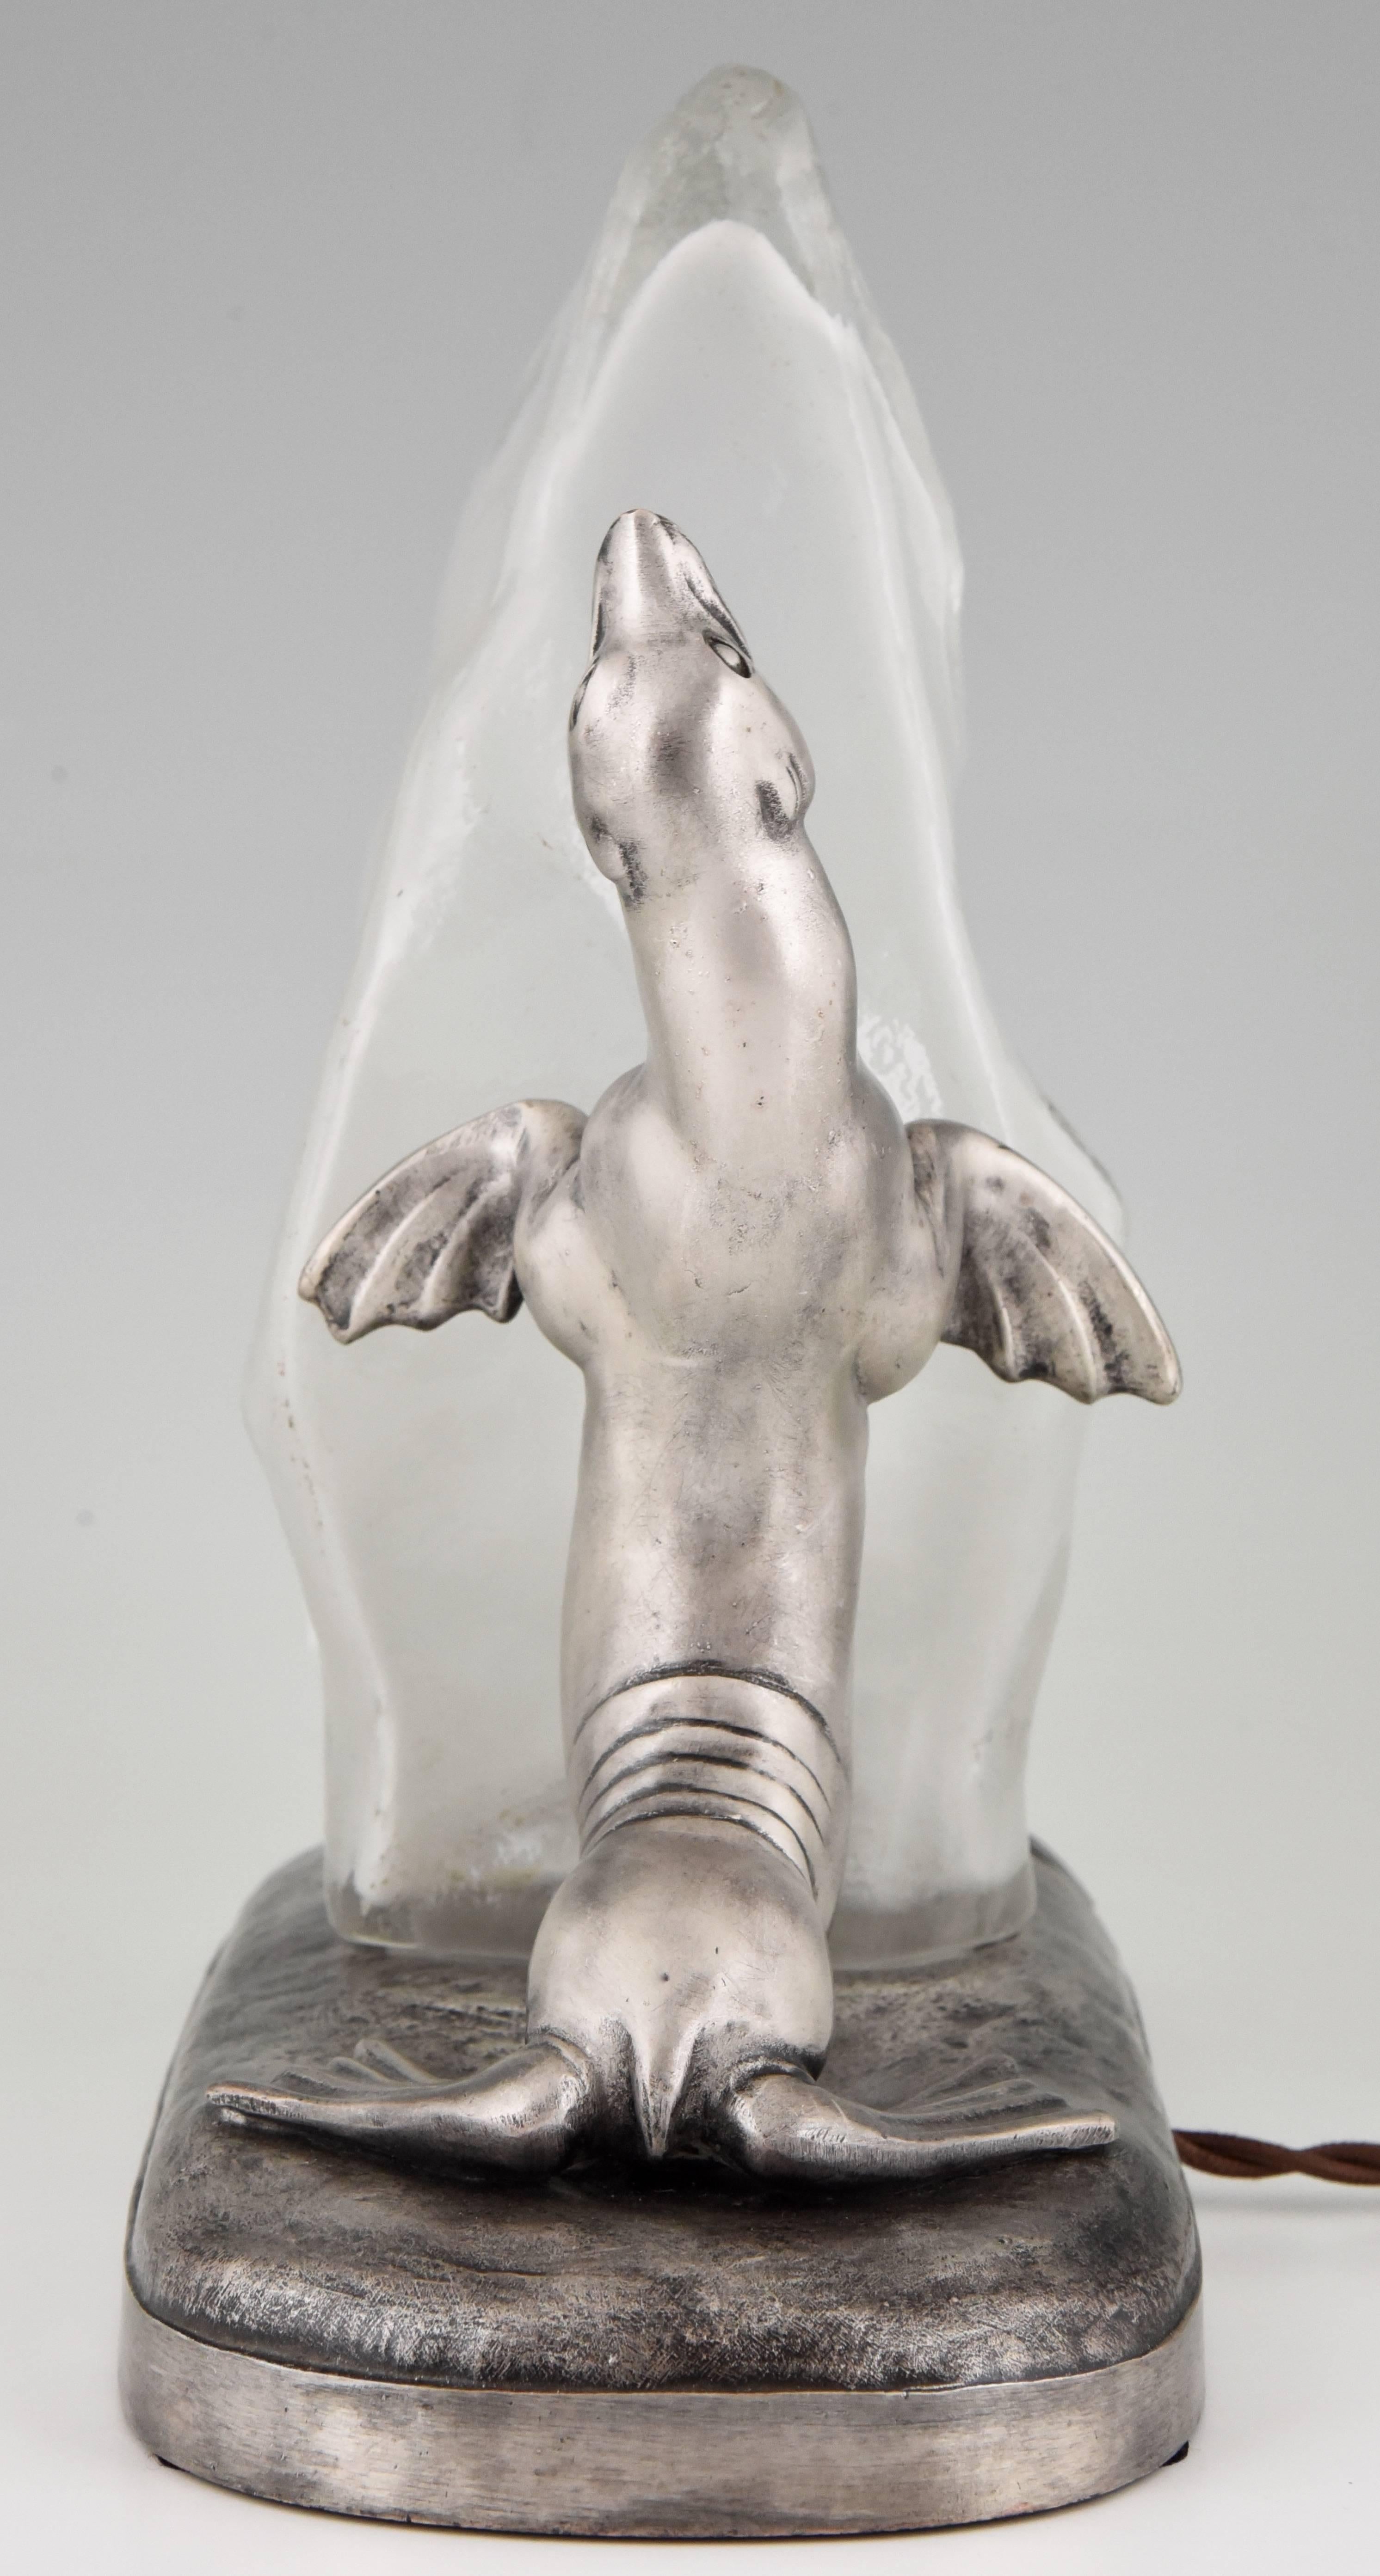 20th Century Art Deco Lamp with Seal by Carvin, 1930 France